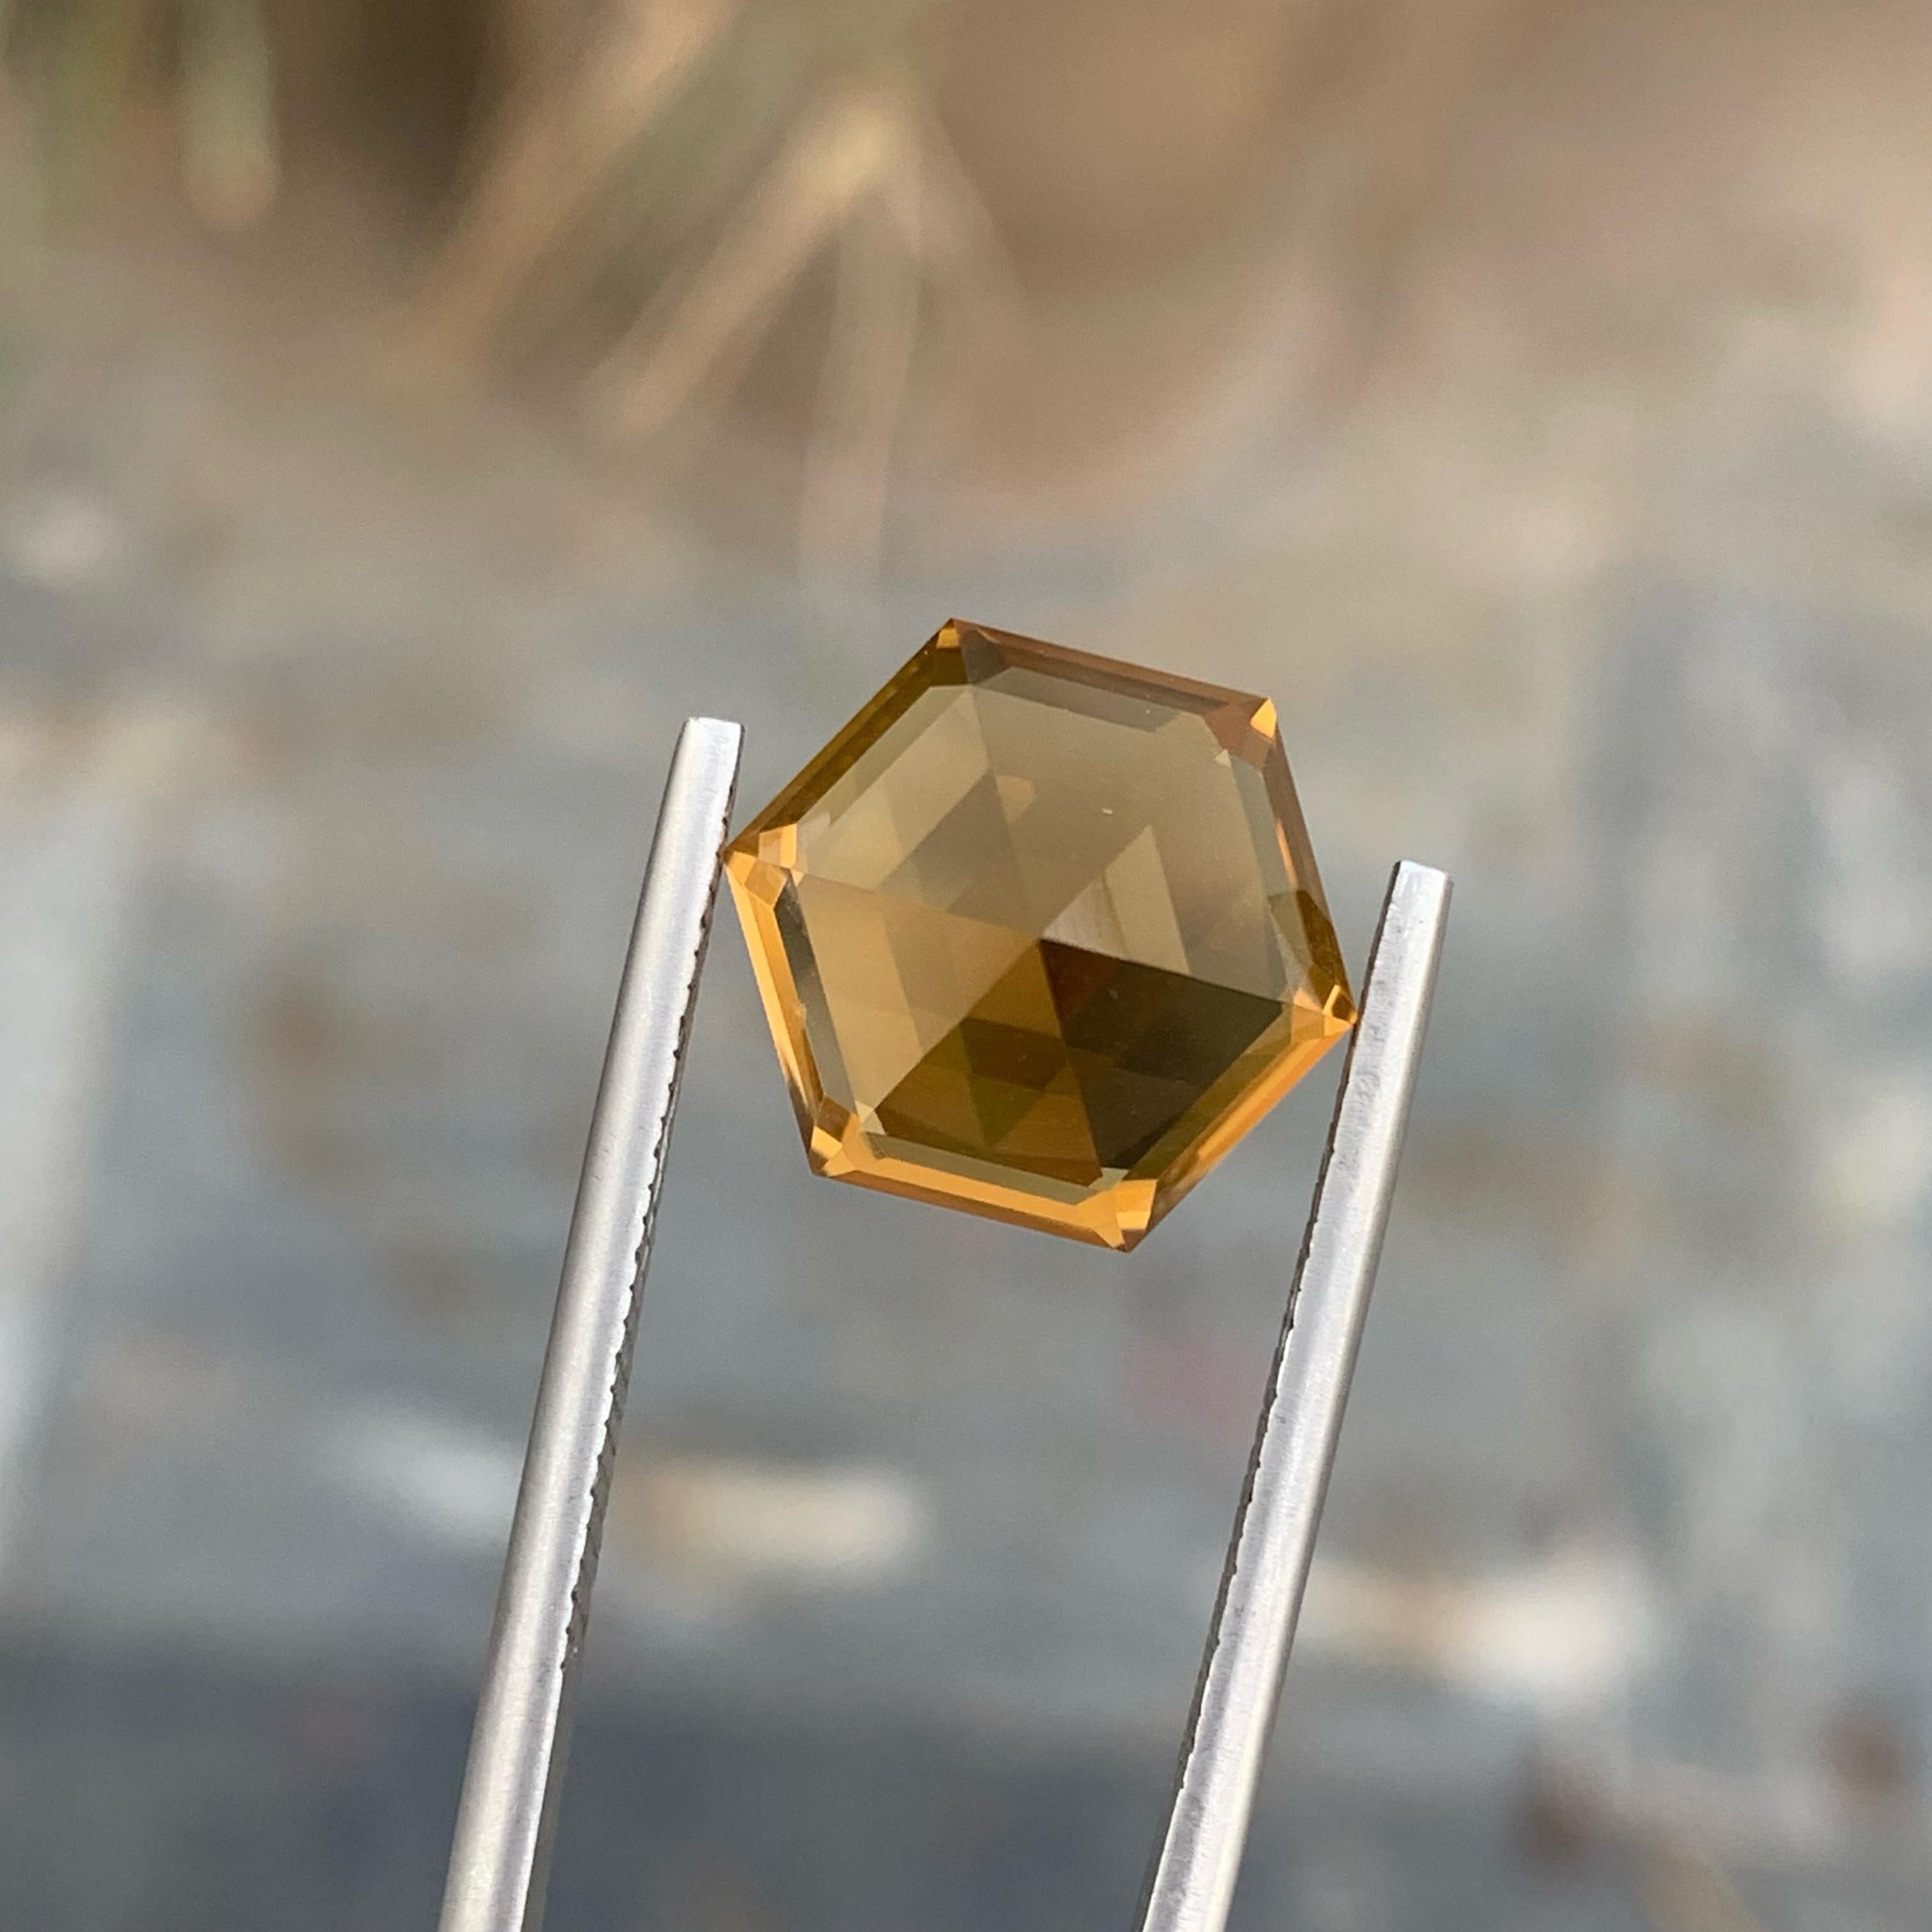 Weight 8.45 carats 
Dimensions 14.3 x 12.3 x 9.6 mm
Treatment None 
Origin Brazil 
Clarity Loupe Clean 
Shape Hexagonal 
Cut Hexagon 



Explore the captivating beauty of our Hexagonal Orange Citrine, a stunning 8.45 carat gemstone with a unique